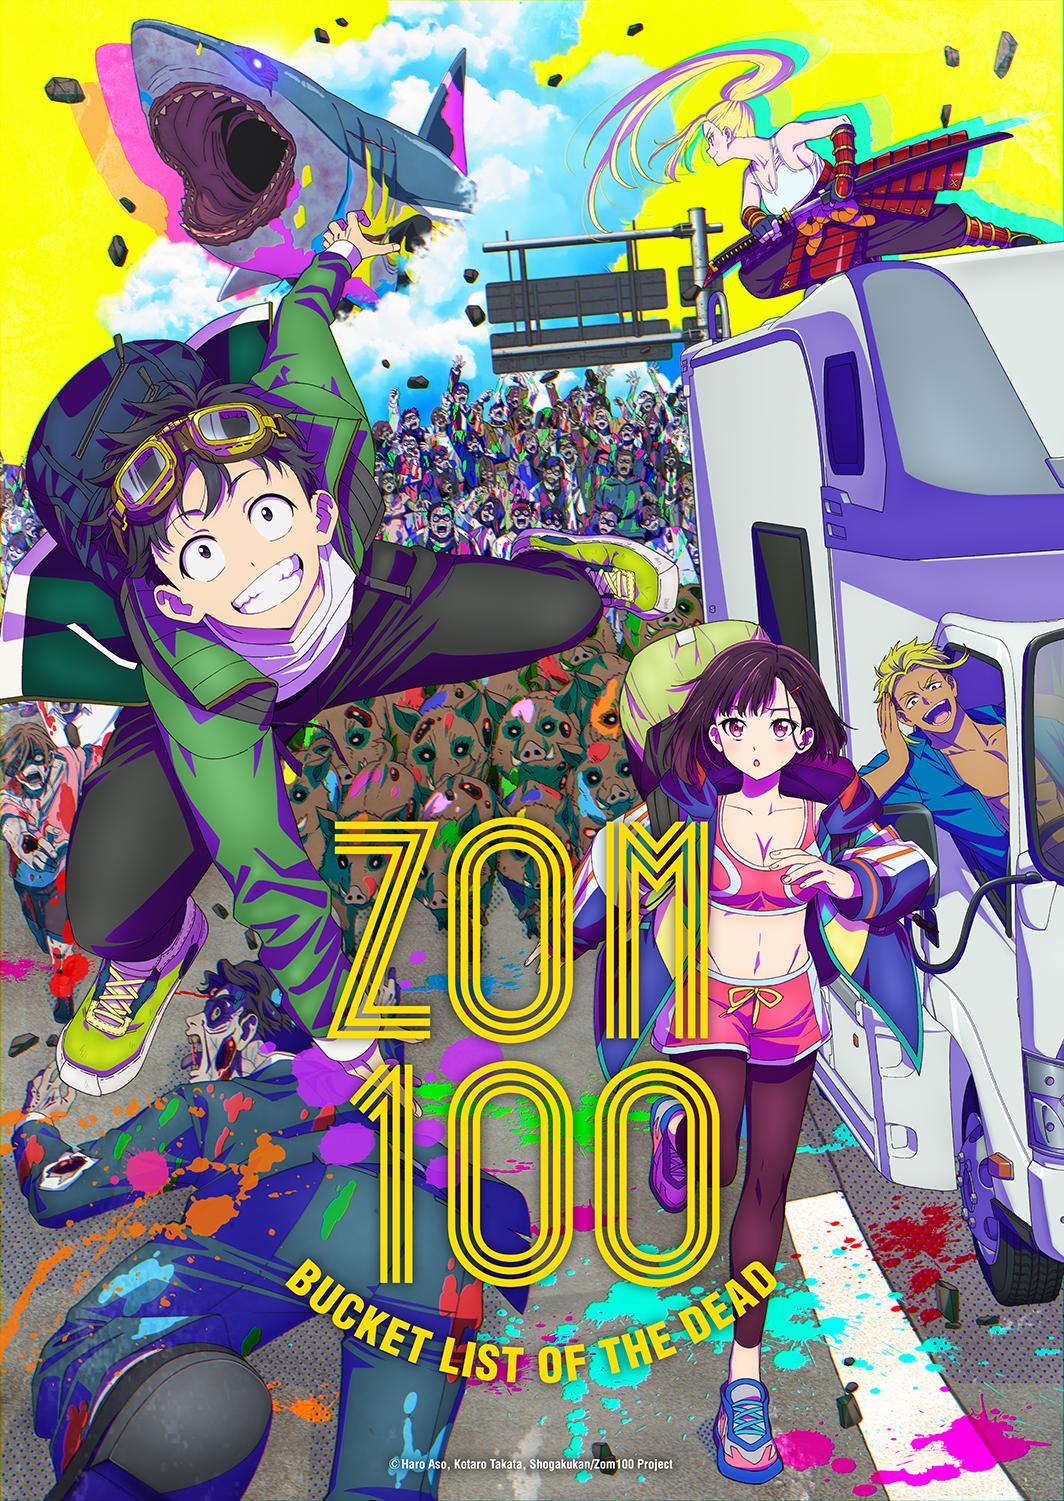 TV ratings for Zom 100: Bucket List Of The Dead (ゾン100～ゾンビになるまでにしたい100のこと～) in Colombia. MBS TV series